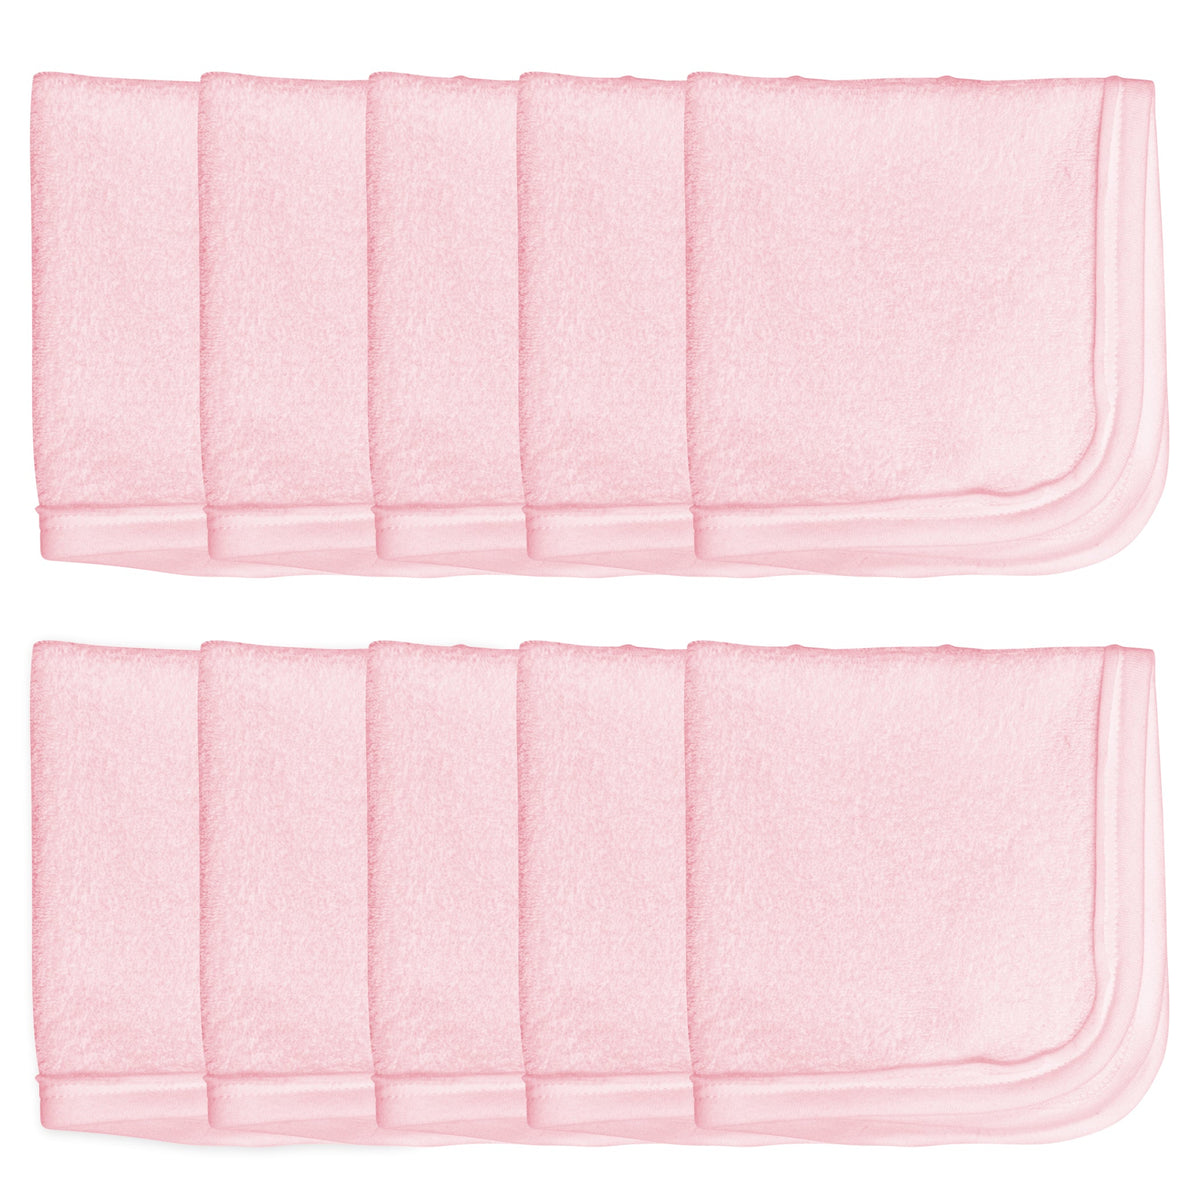 HonestBaby 10-Pack Organic Cotton Baby-Terry Wash Cloths, Rainbow Pinks, One Size